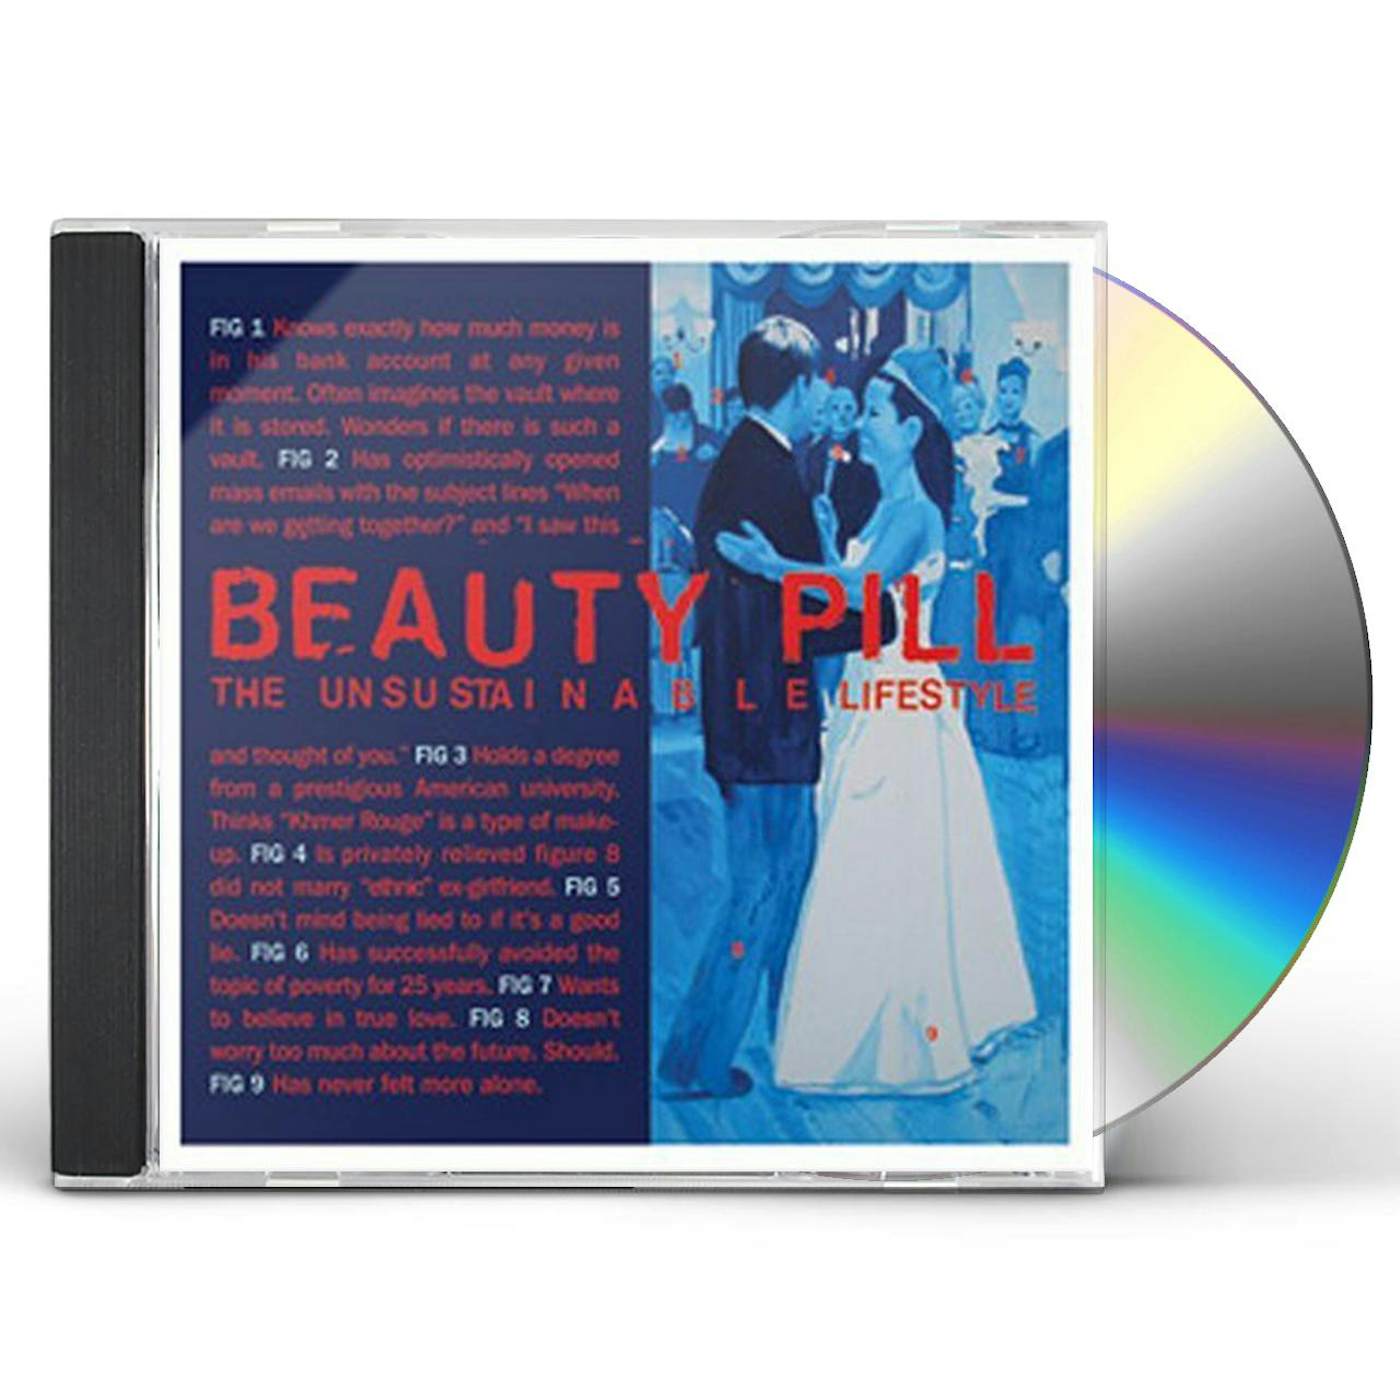 Beauty Pill UNSUSTAINABLE LIFESTYLE CD